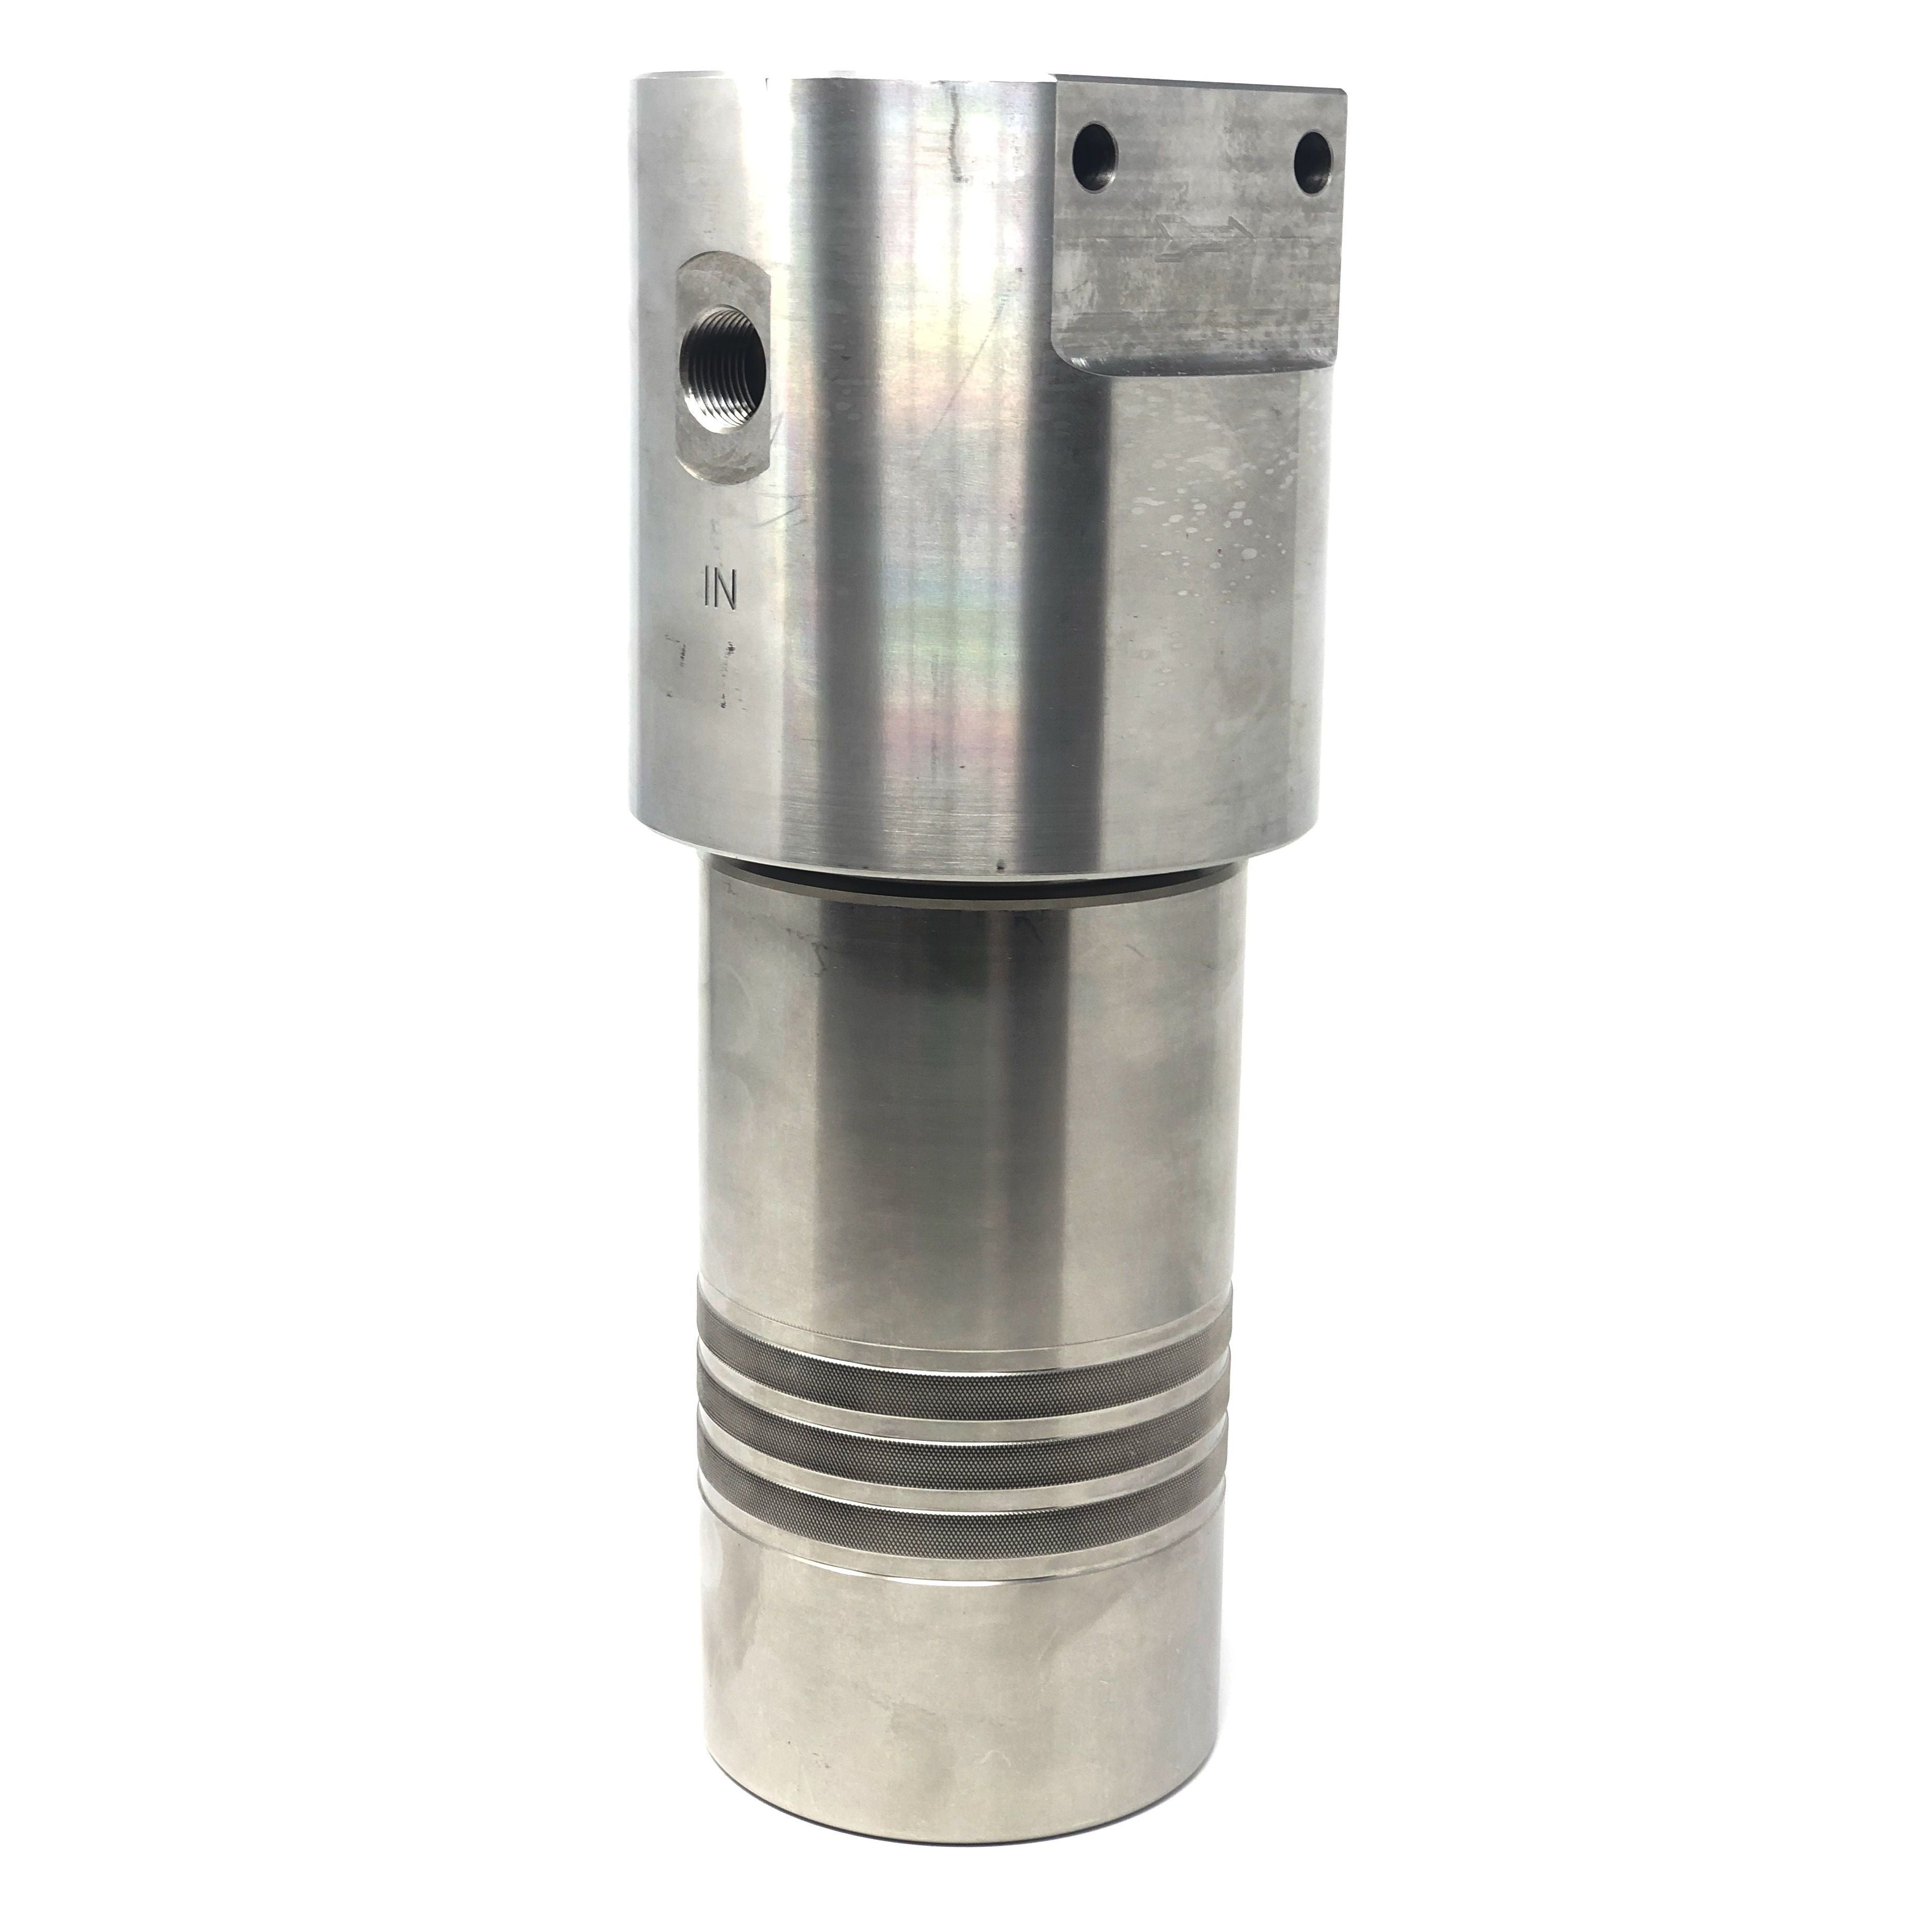 52S-2412N-25SEN : Chase Ultra High Pressure Inline Filter, 10000psi, 3/4" NPT, 25 Micron, With Visual Indicator, No Bypass